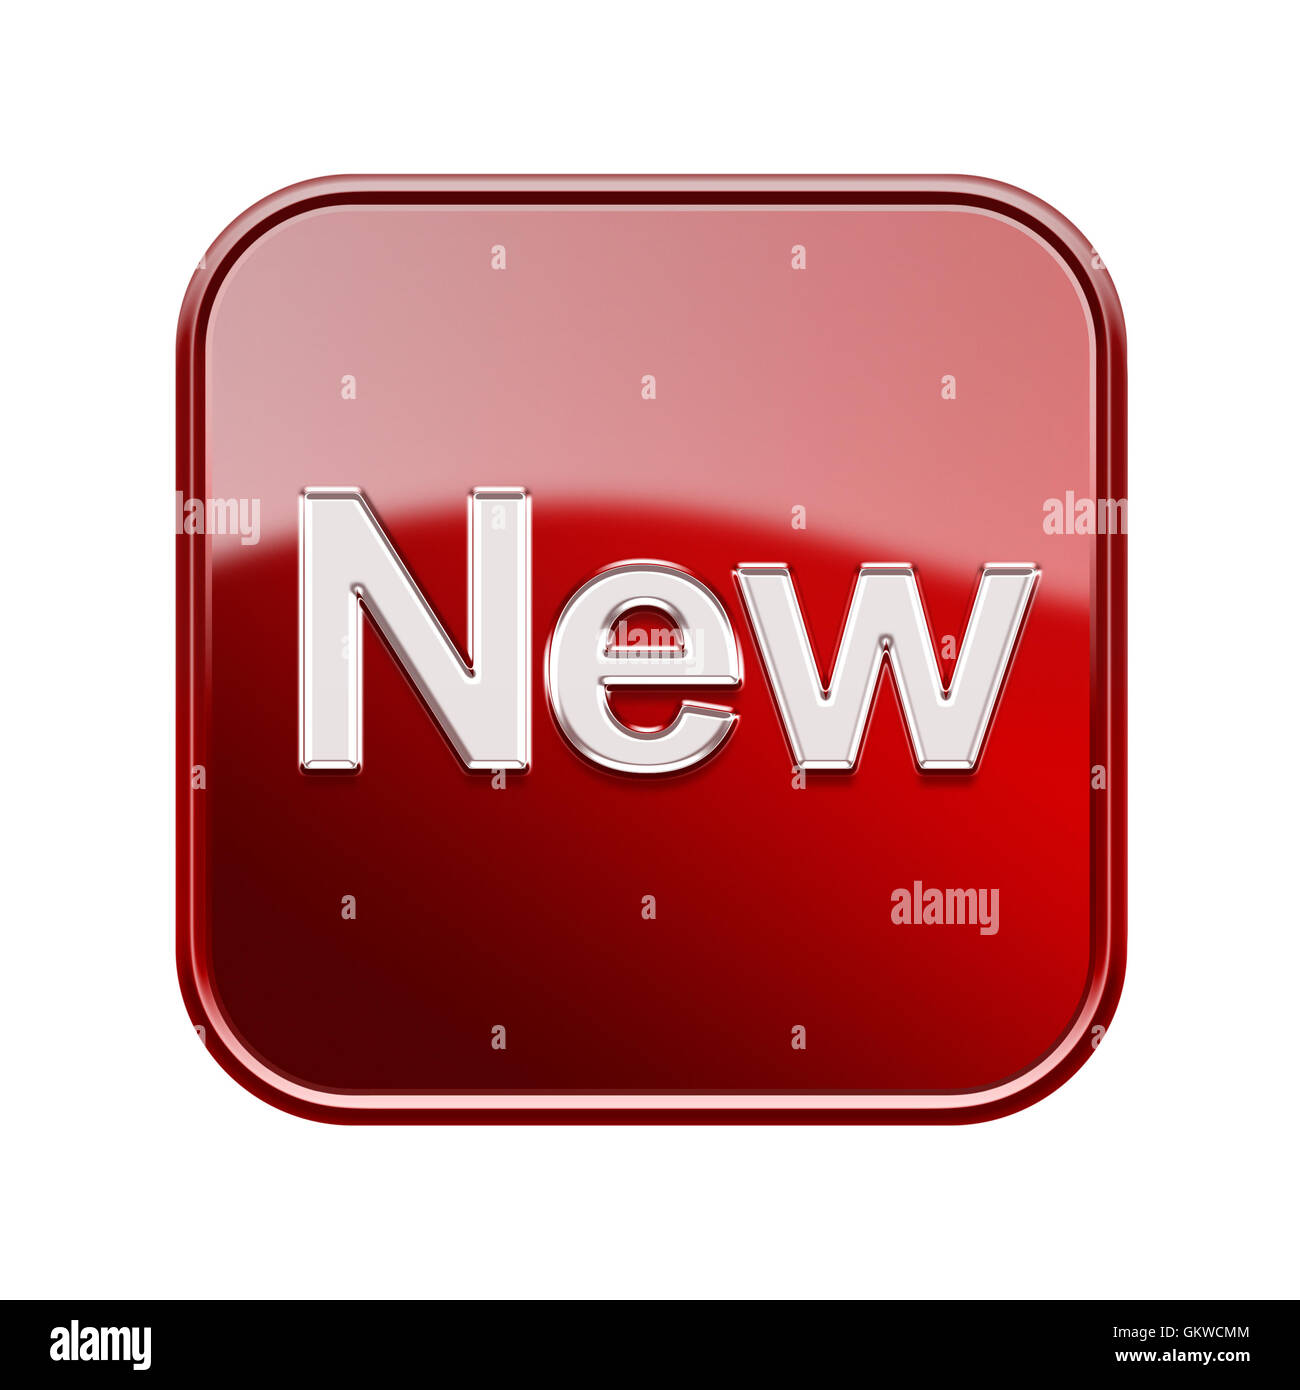 New icon glossy red, isolated on white background Stock Photo